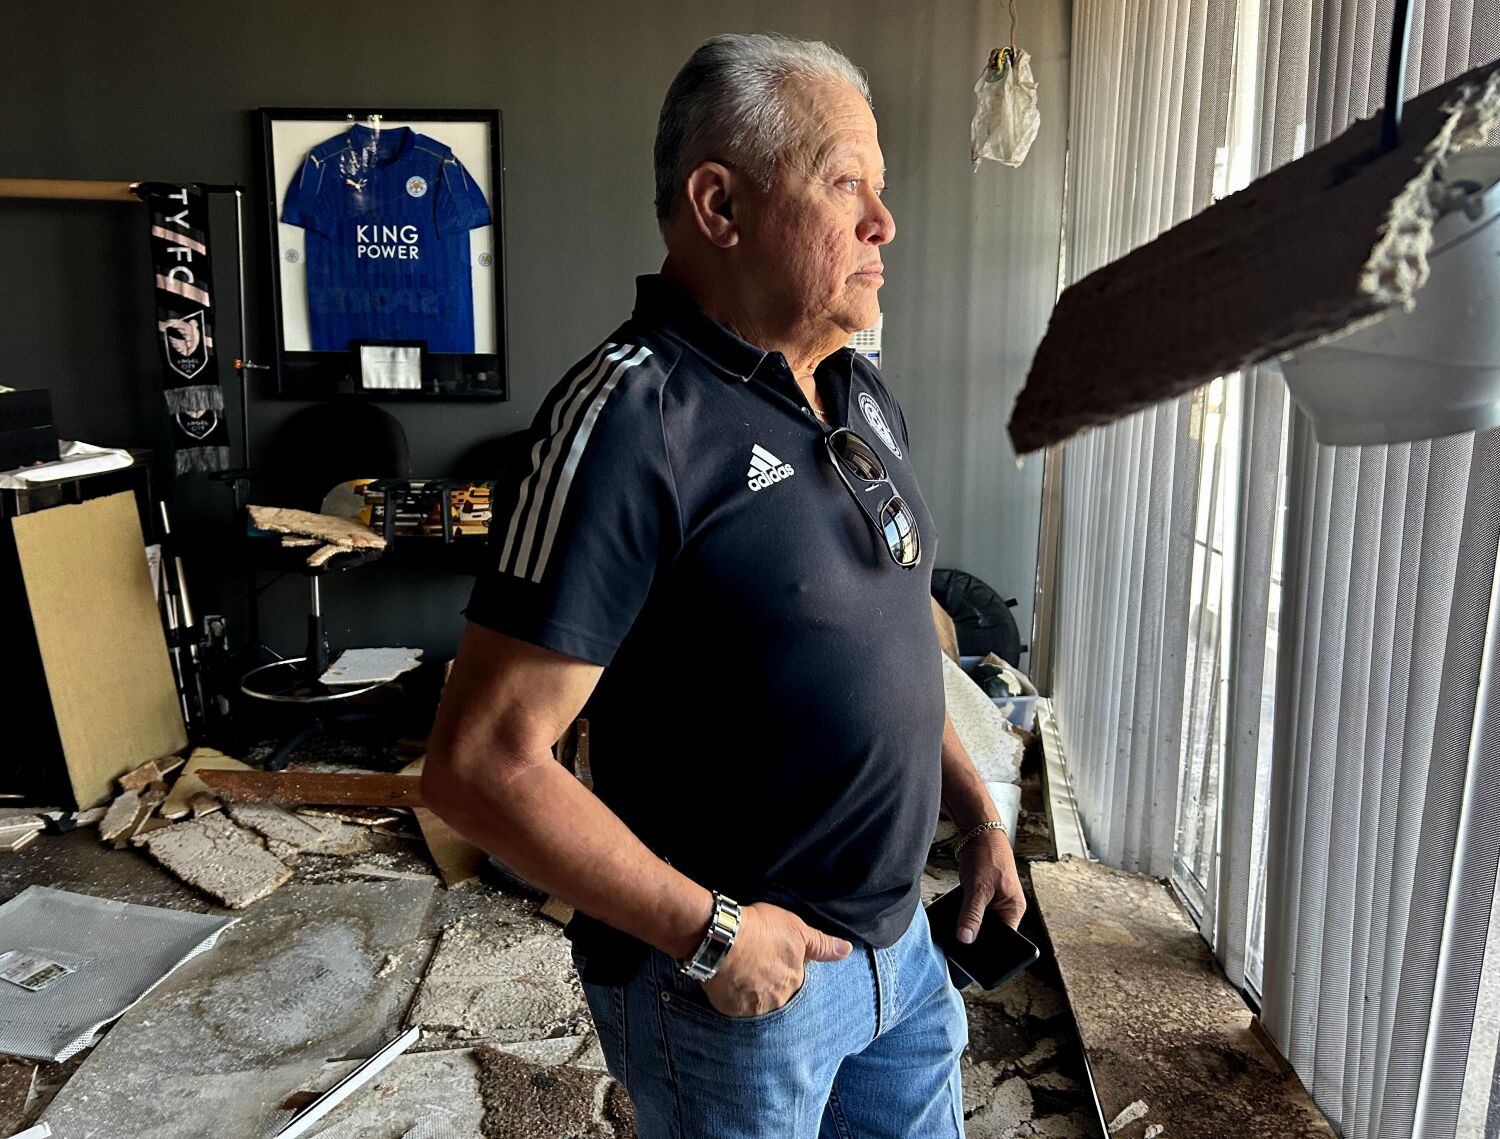 After a civil war and 1992 L.A. riots, he thought he'd seen it all. Then came a tornado